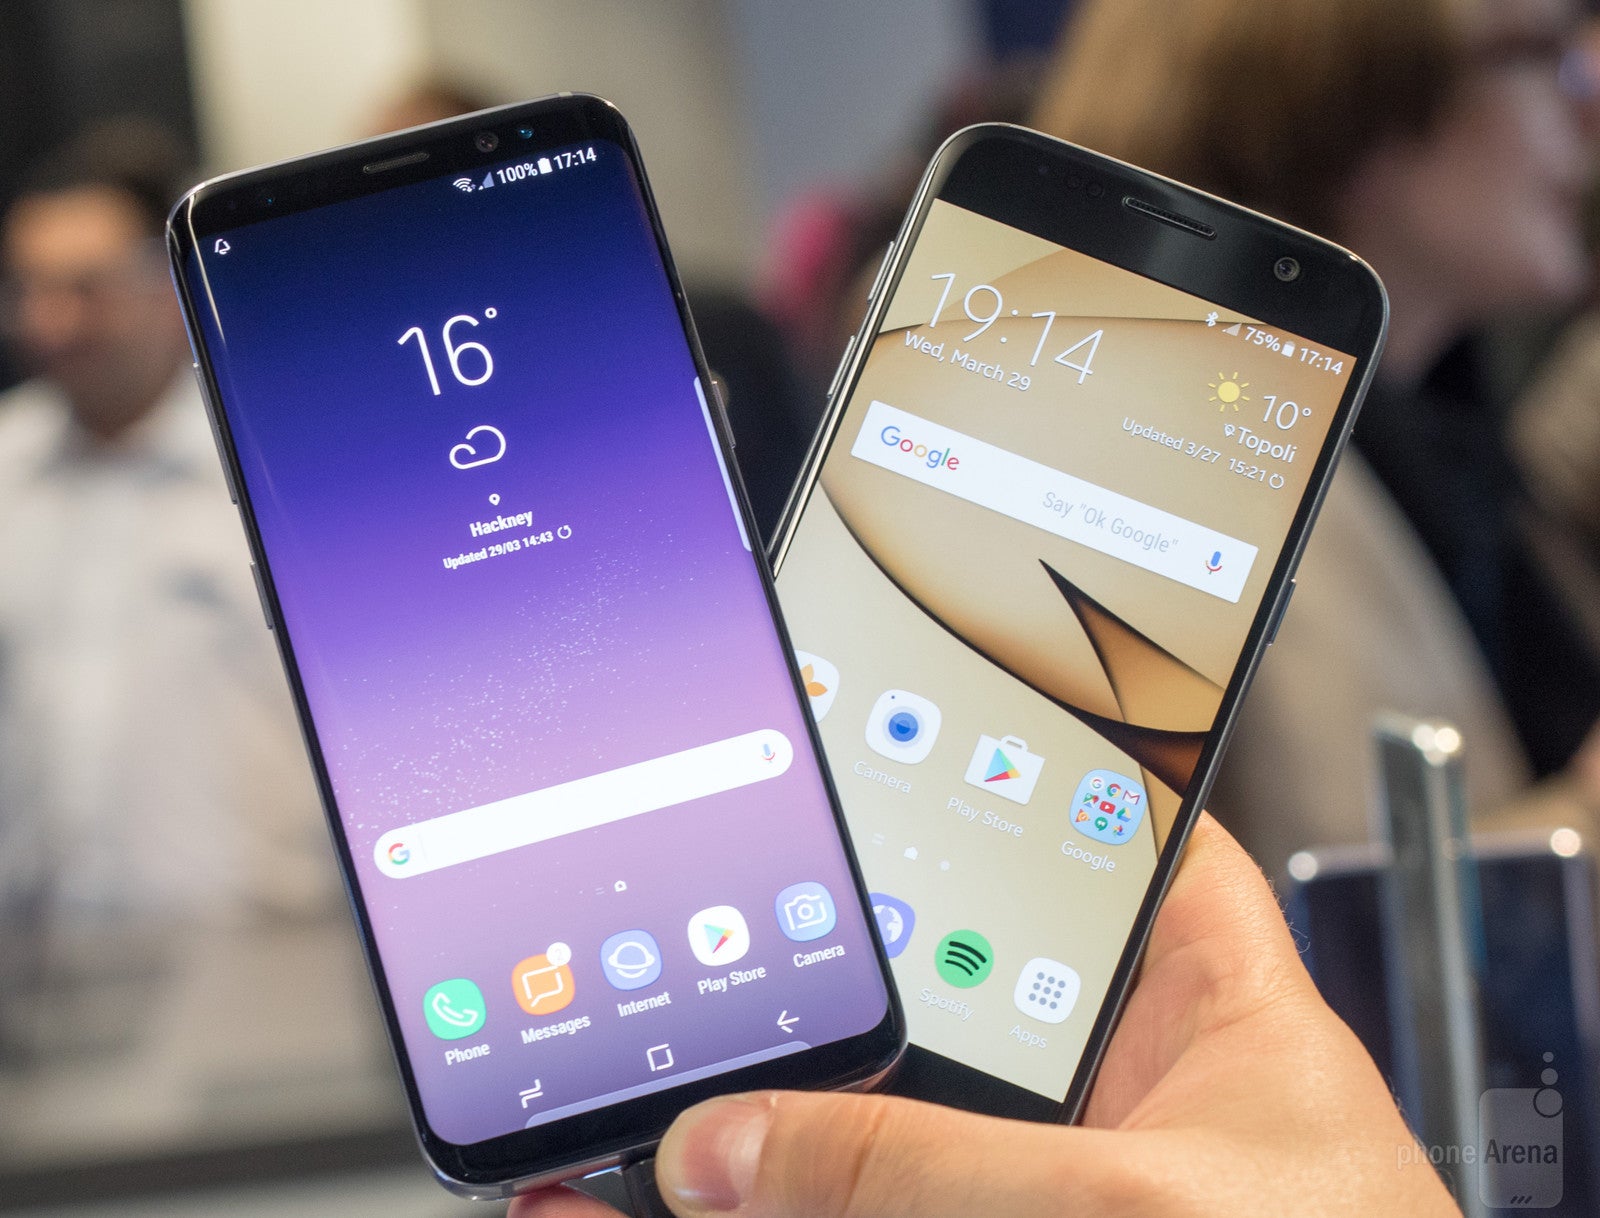 The Galaxy S8 fits a taller display in an equally wide body - Samsung Galaxy S8 vs Samsung Galaxy S7: what's new, anyway?